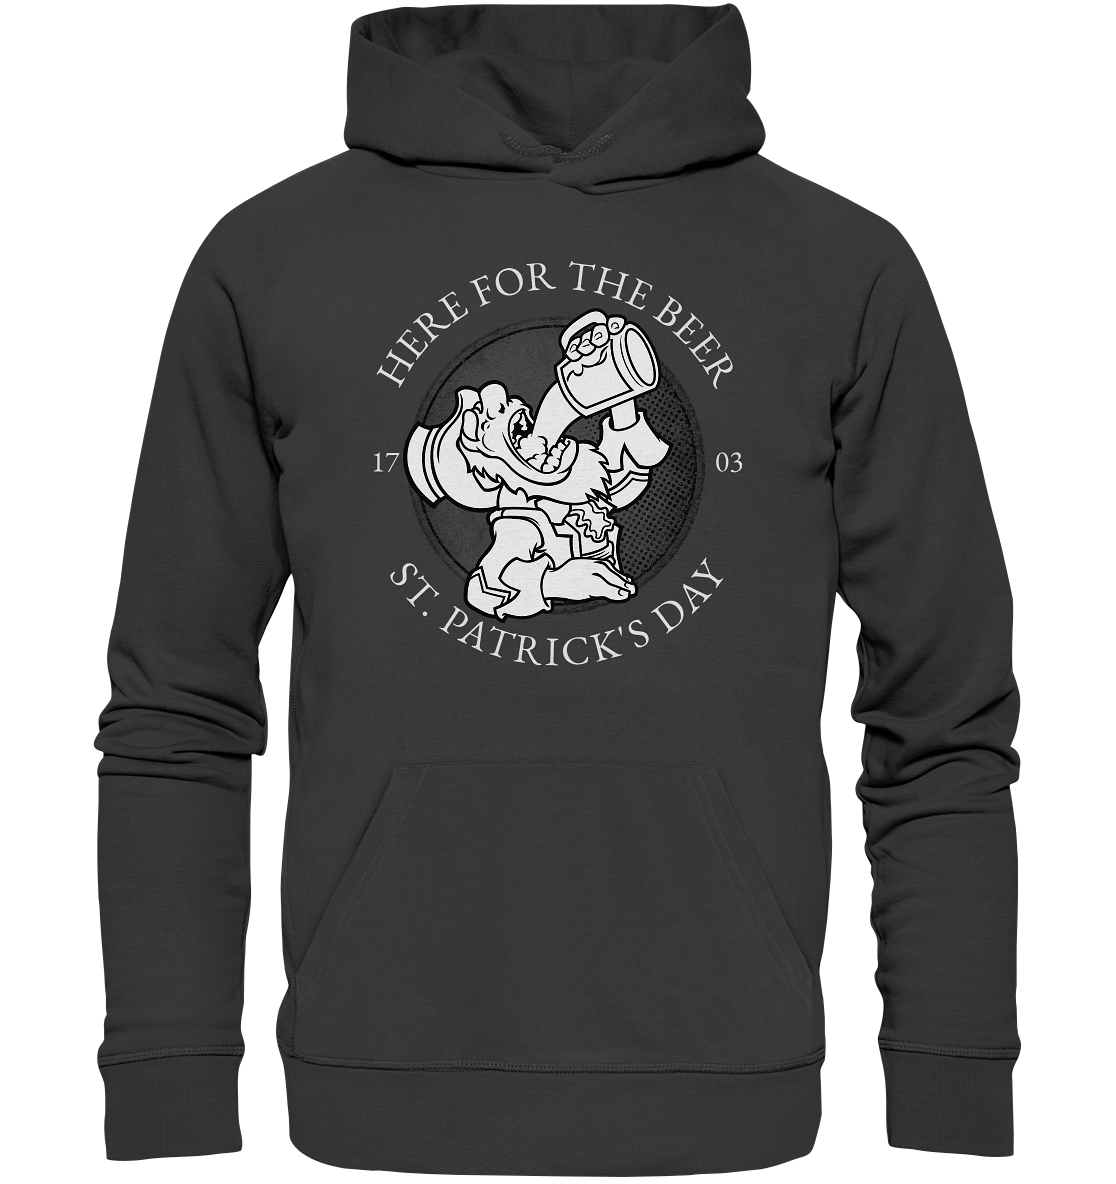 Here For The Beer "St. Patrick's Day" - Premium Unisex Hoodie